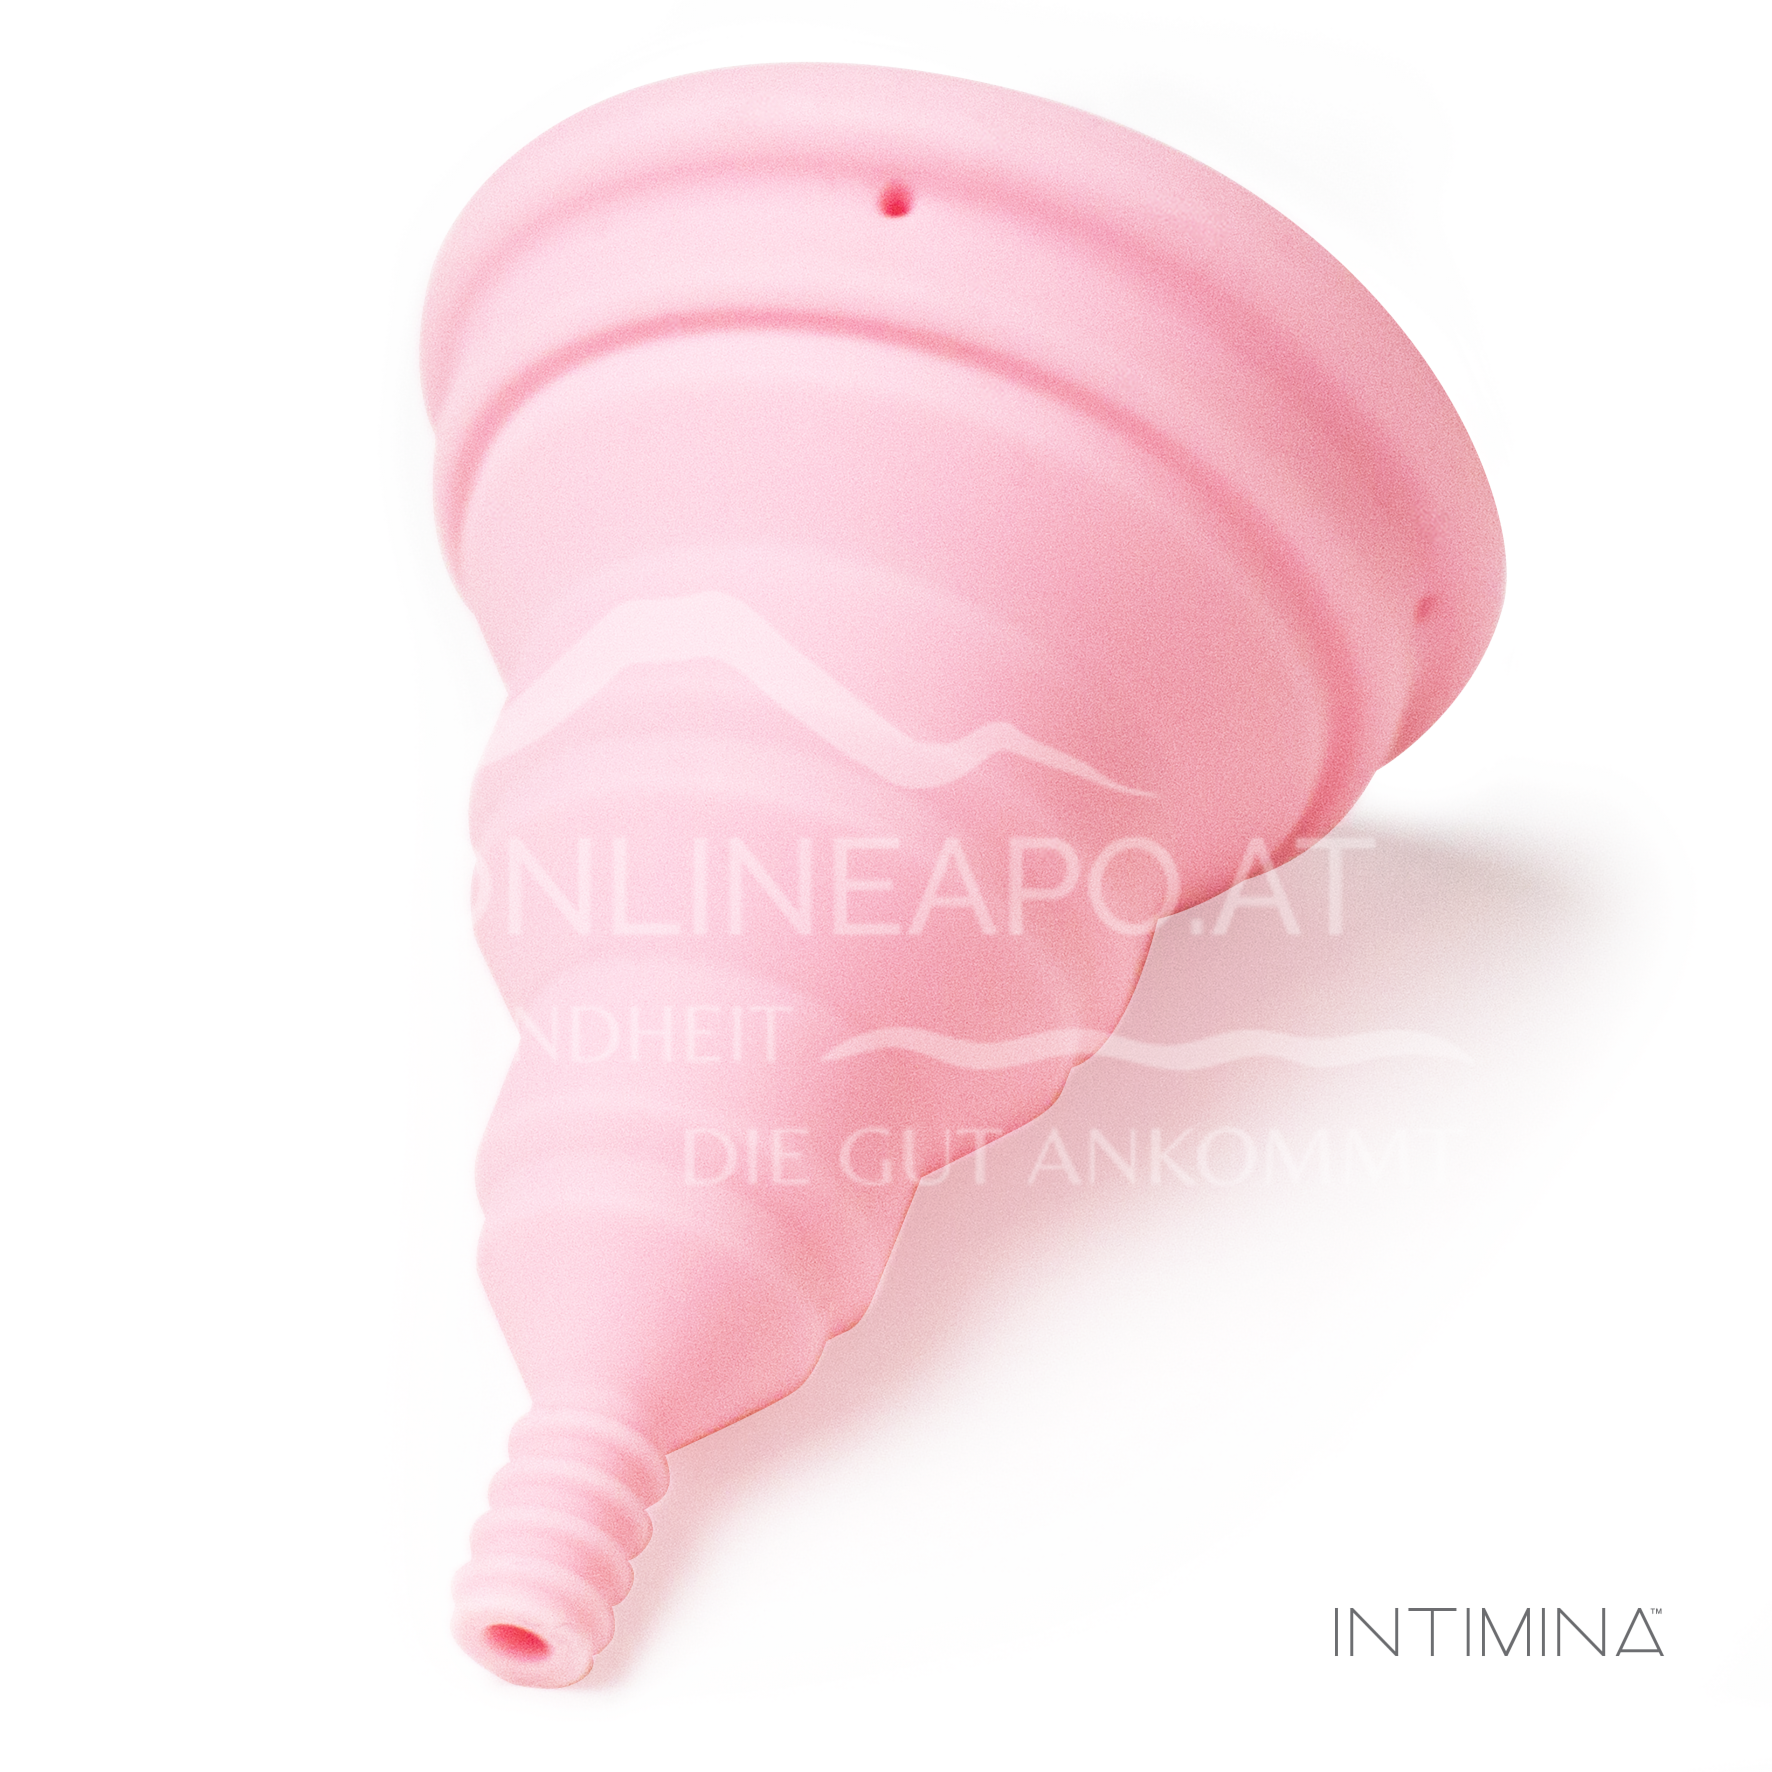 Intimina Lily Cup Compact - Größe A